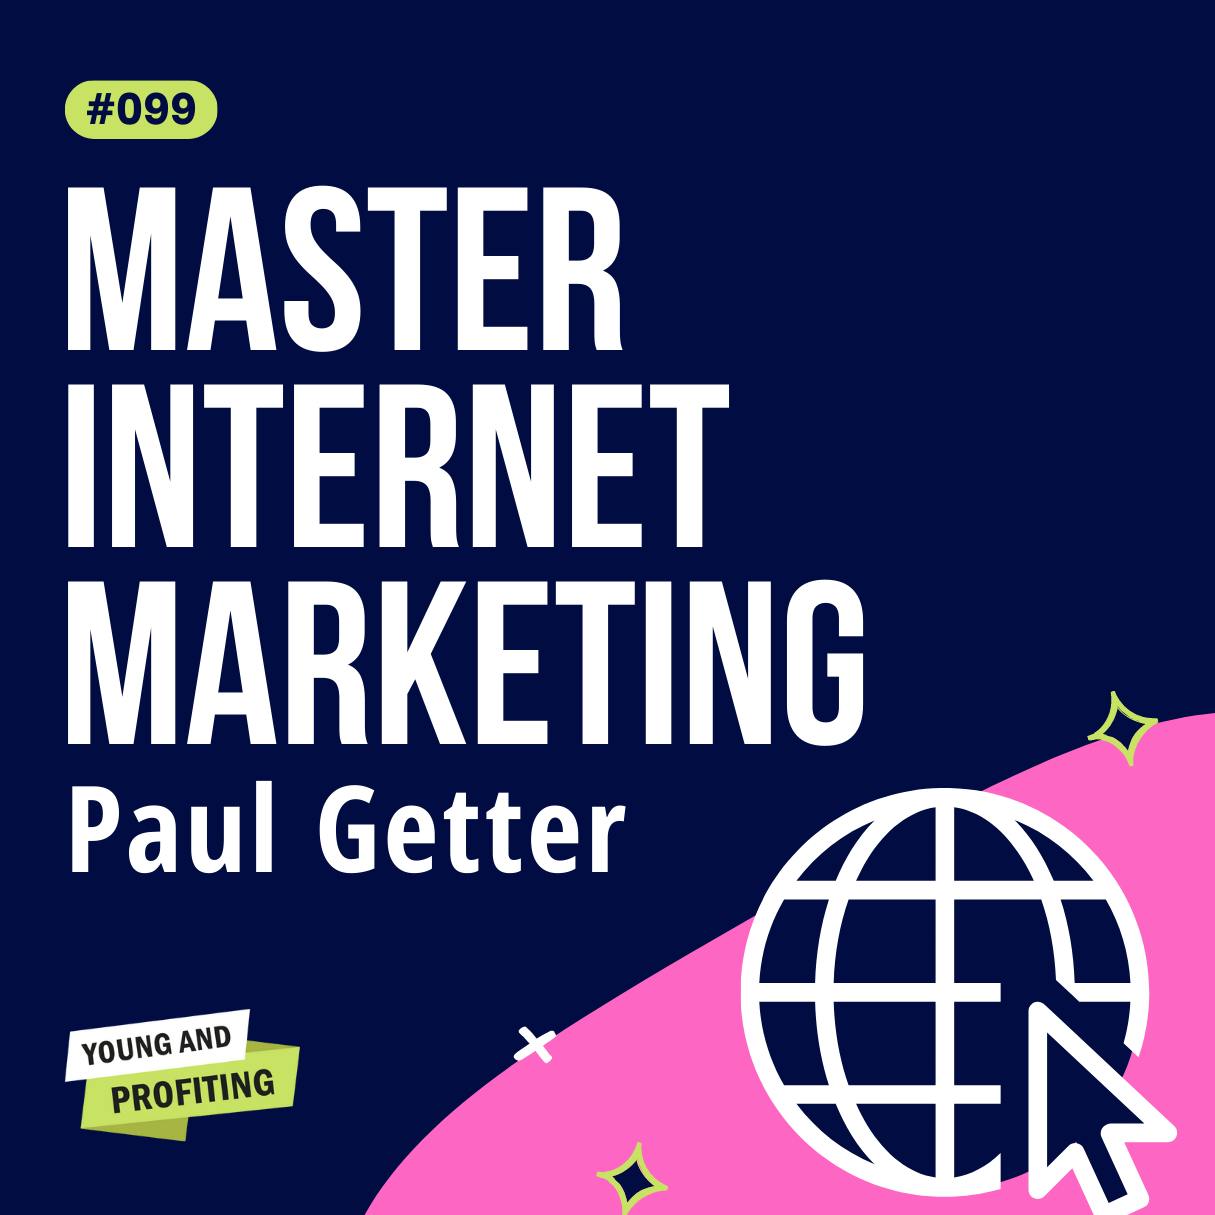 YAPClassic: Paul Getter, Marketing Secrets to Grow Your Brand and Business  by Hala Taha | YAP Media Network